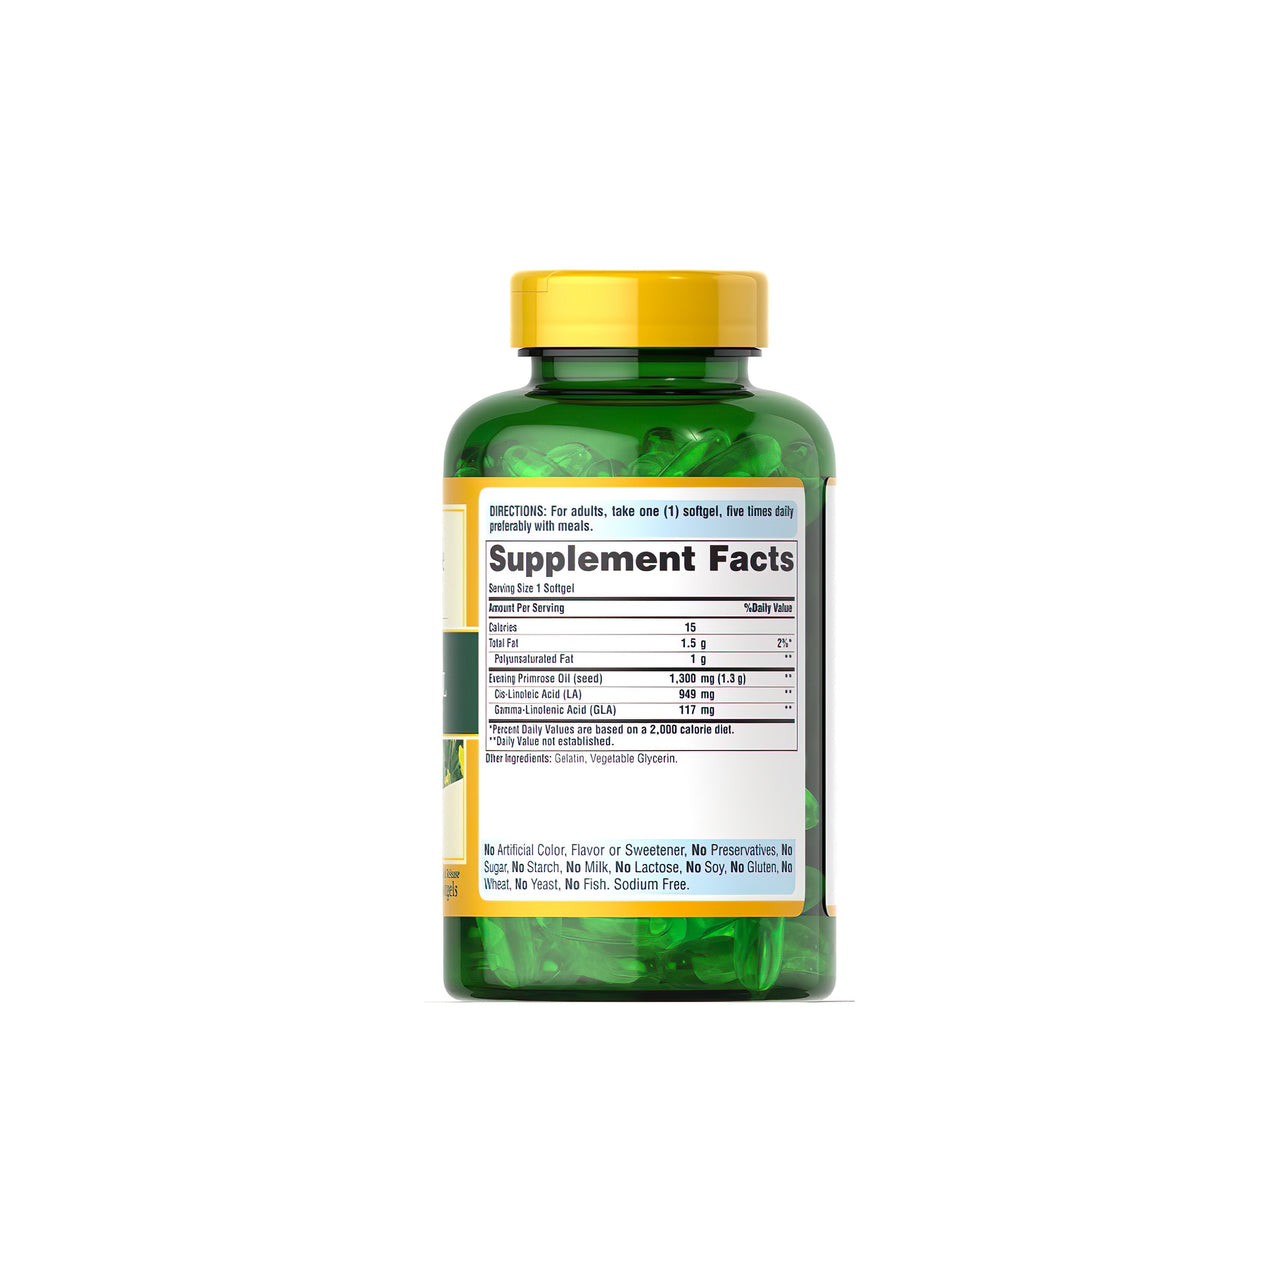 A bottle of Puritan's Pride Evening Primrose Oil 1300 mg with GLA 120 Rapid Release Softgels on a white background.